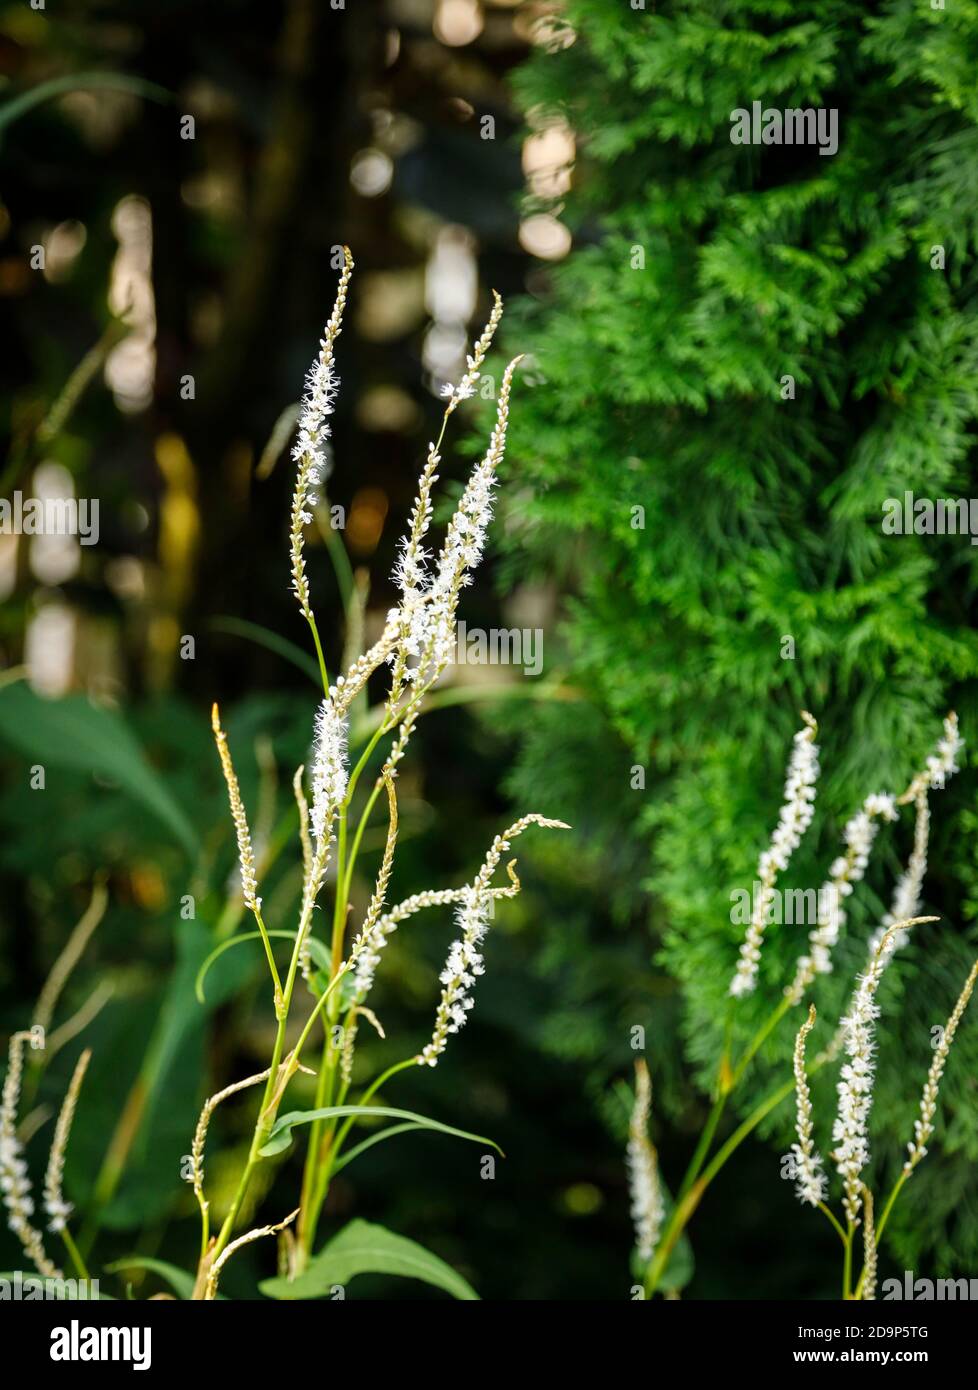 White flowers of the candle knotweed Stock Photo